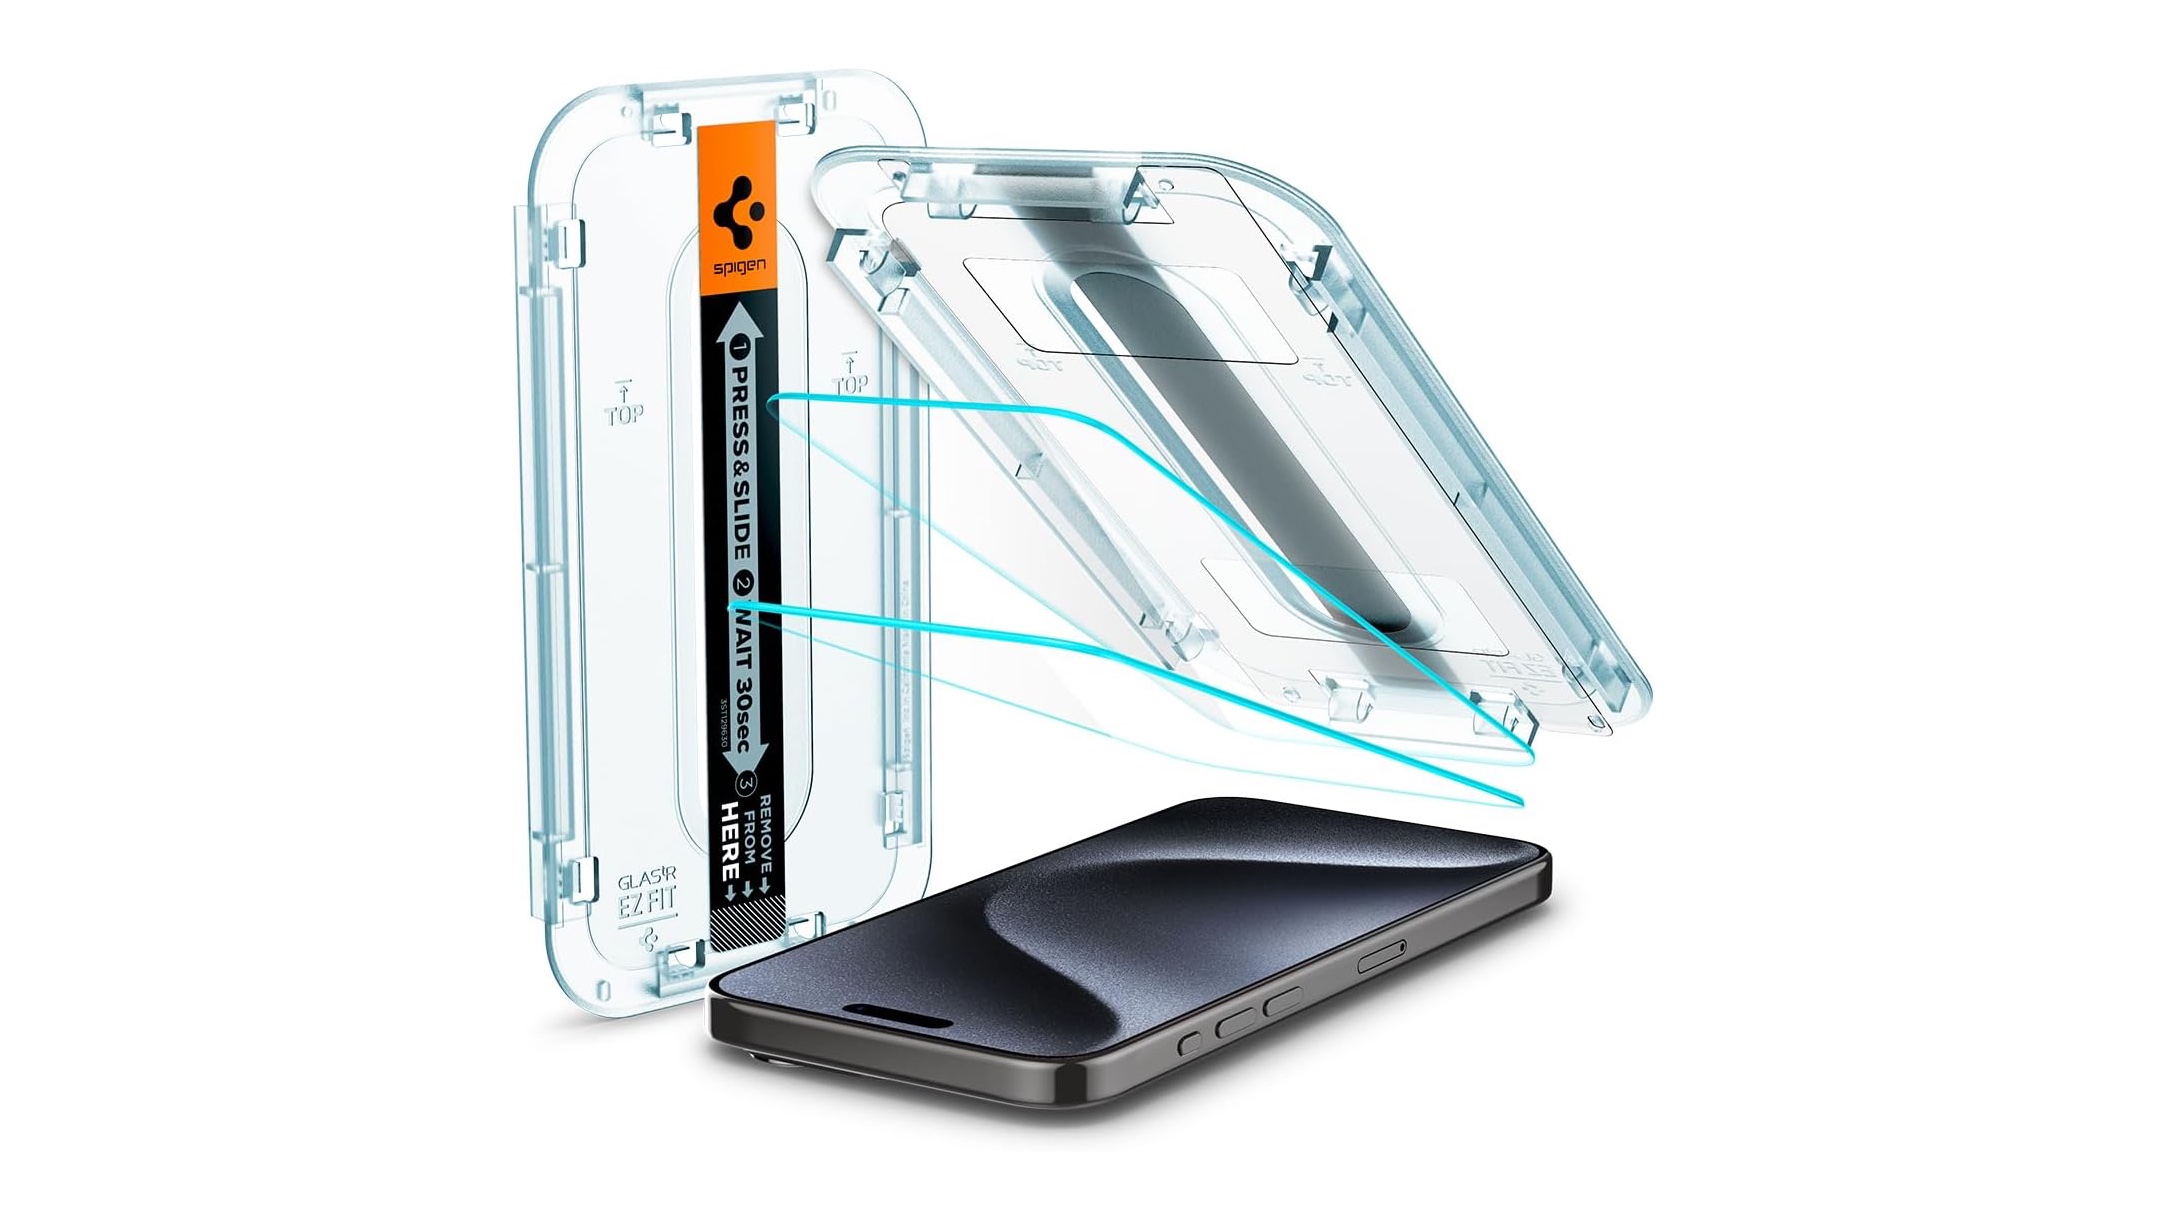 Edge-to-Edge Full Coverage HD Tempered Glass Screen Protector for iPhone 15  / iPhone 15 Pro - HD Accessory